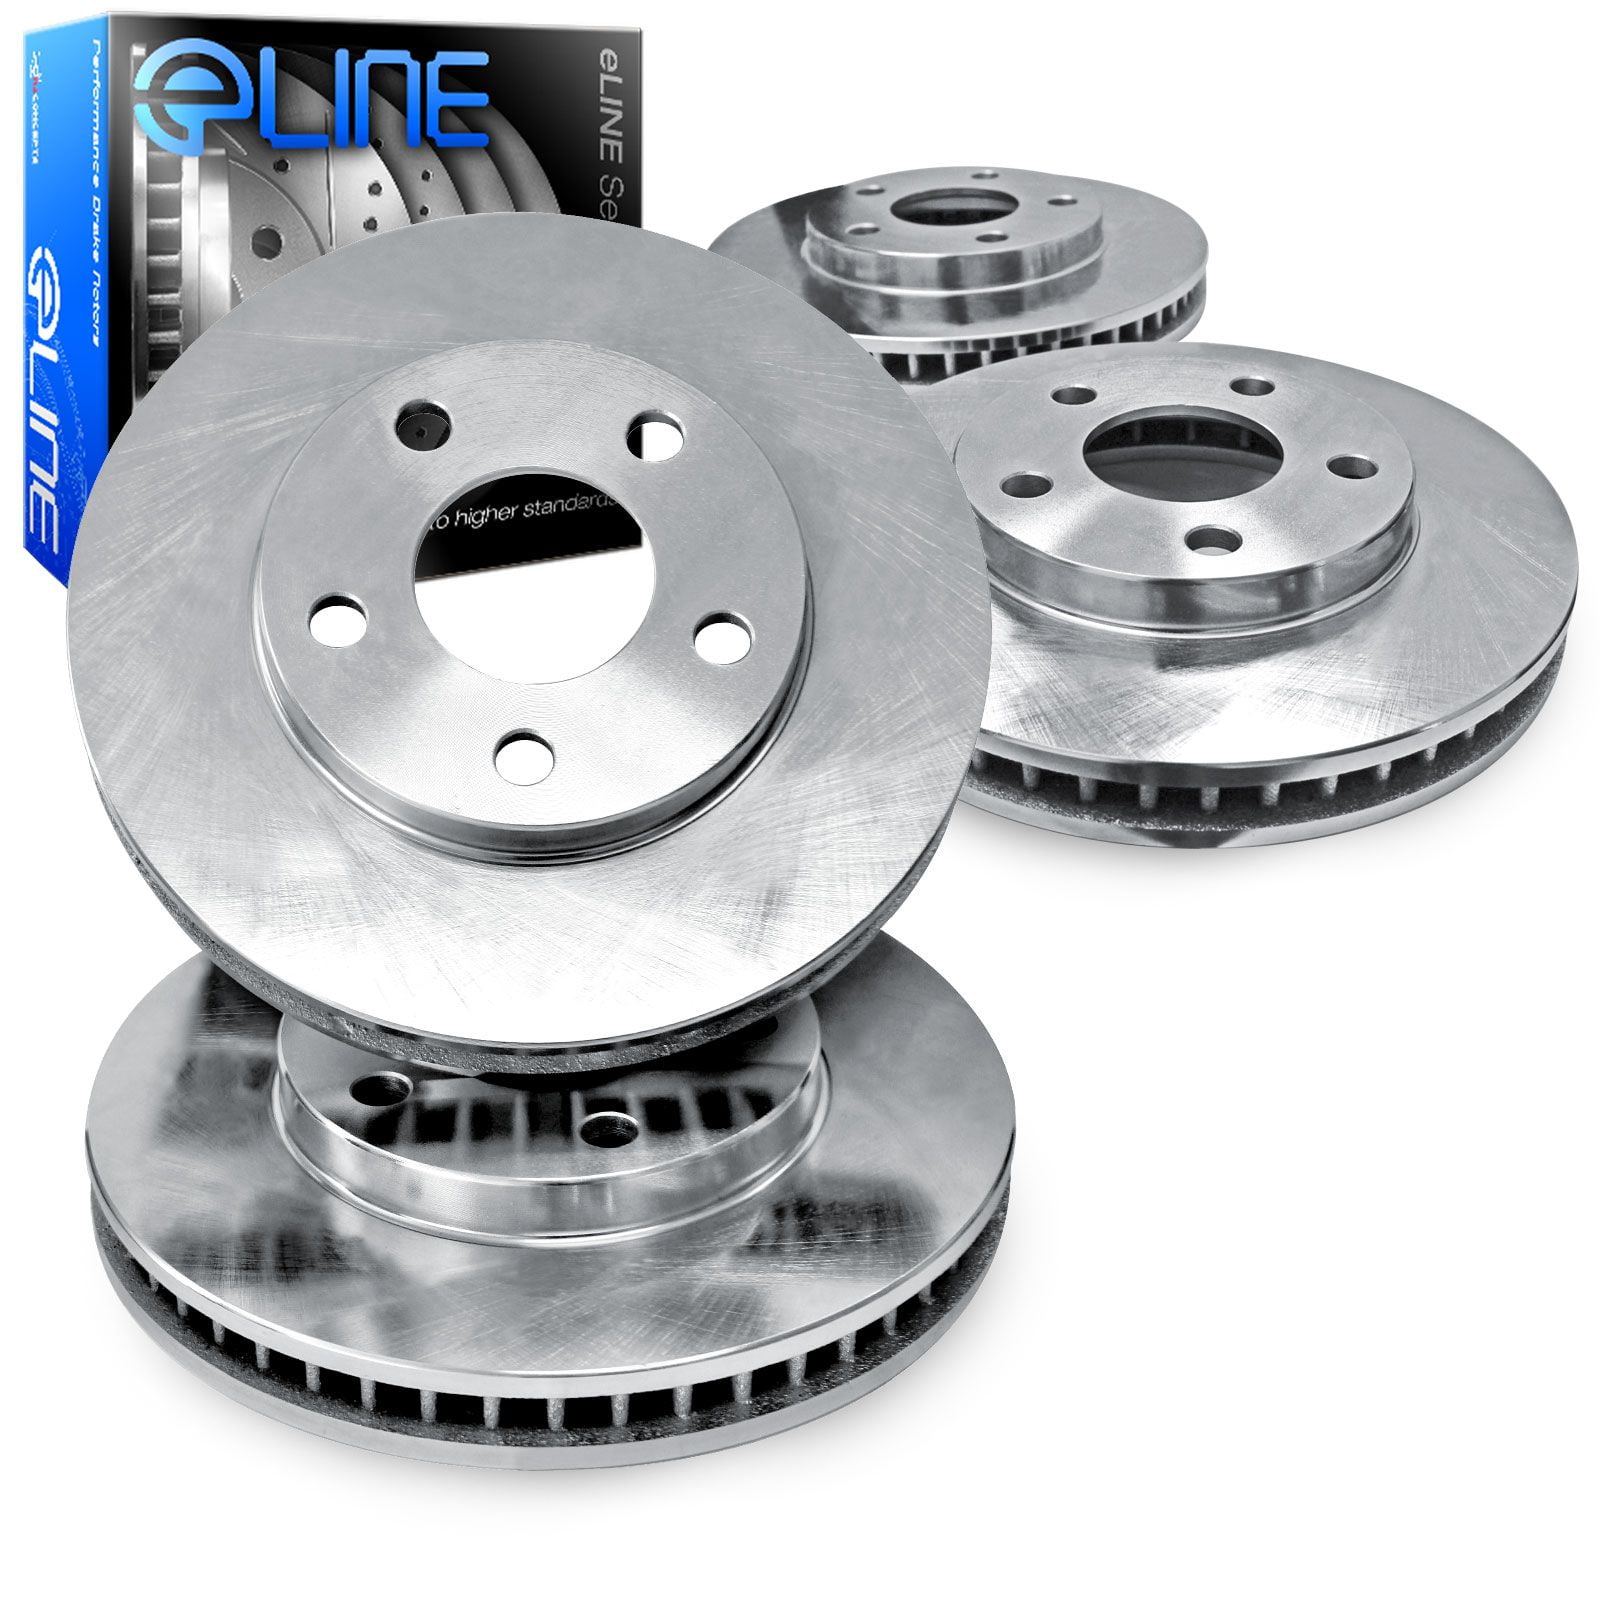 OE Replacement Rotors w/Metallic Pads F See Desc. 2010 Fit Dodge Ram 1500 